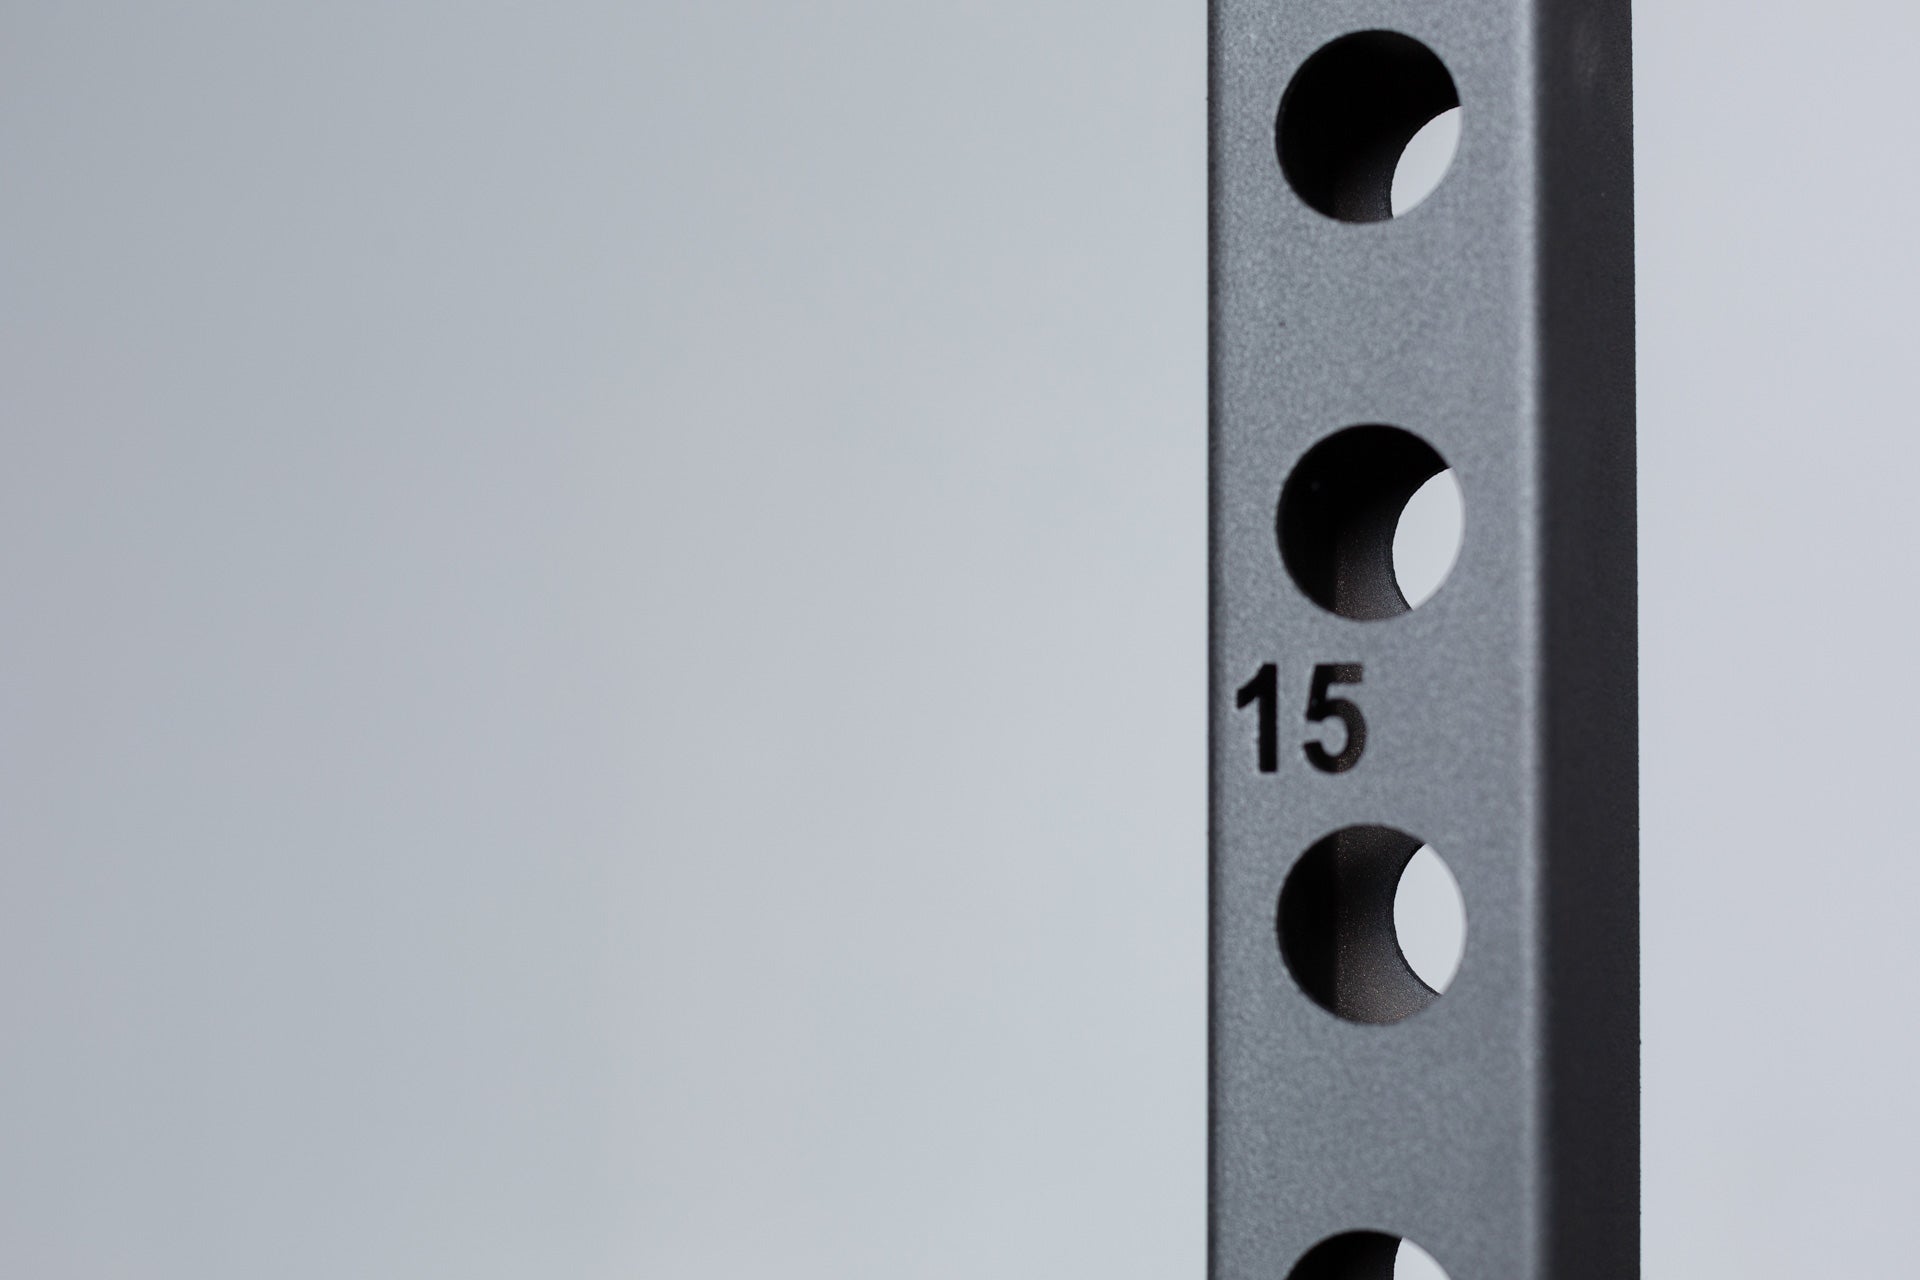 PR-1050 Short Power Rack Close Up of Upright Holes and Laser-Cut Number